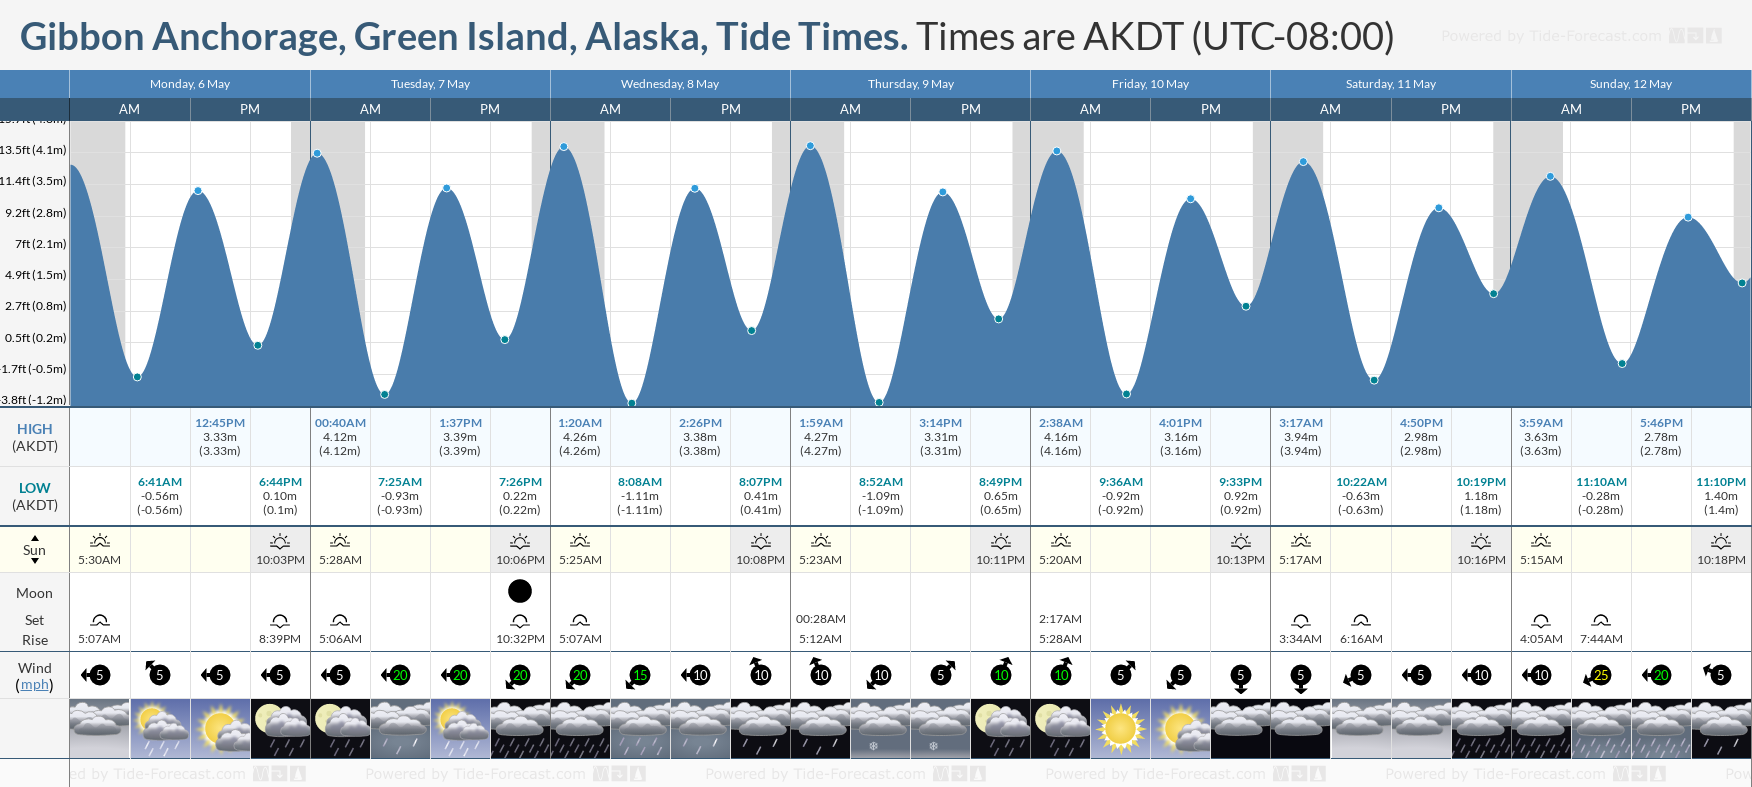 Gibbon Anchorage, Green Island, Alaska Tide Chart including high and low tide tide times for the next 7 days